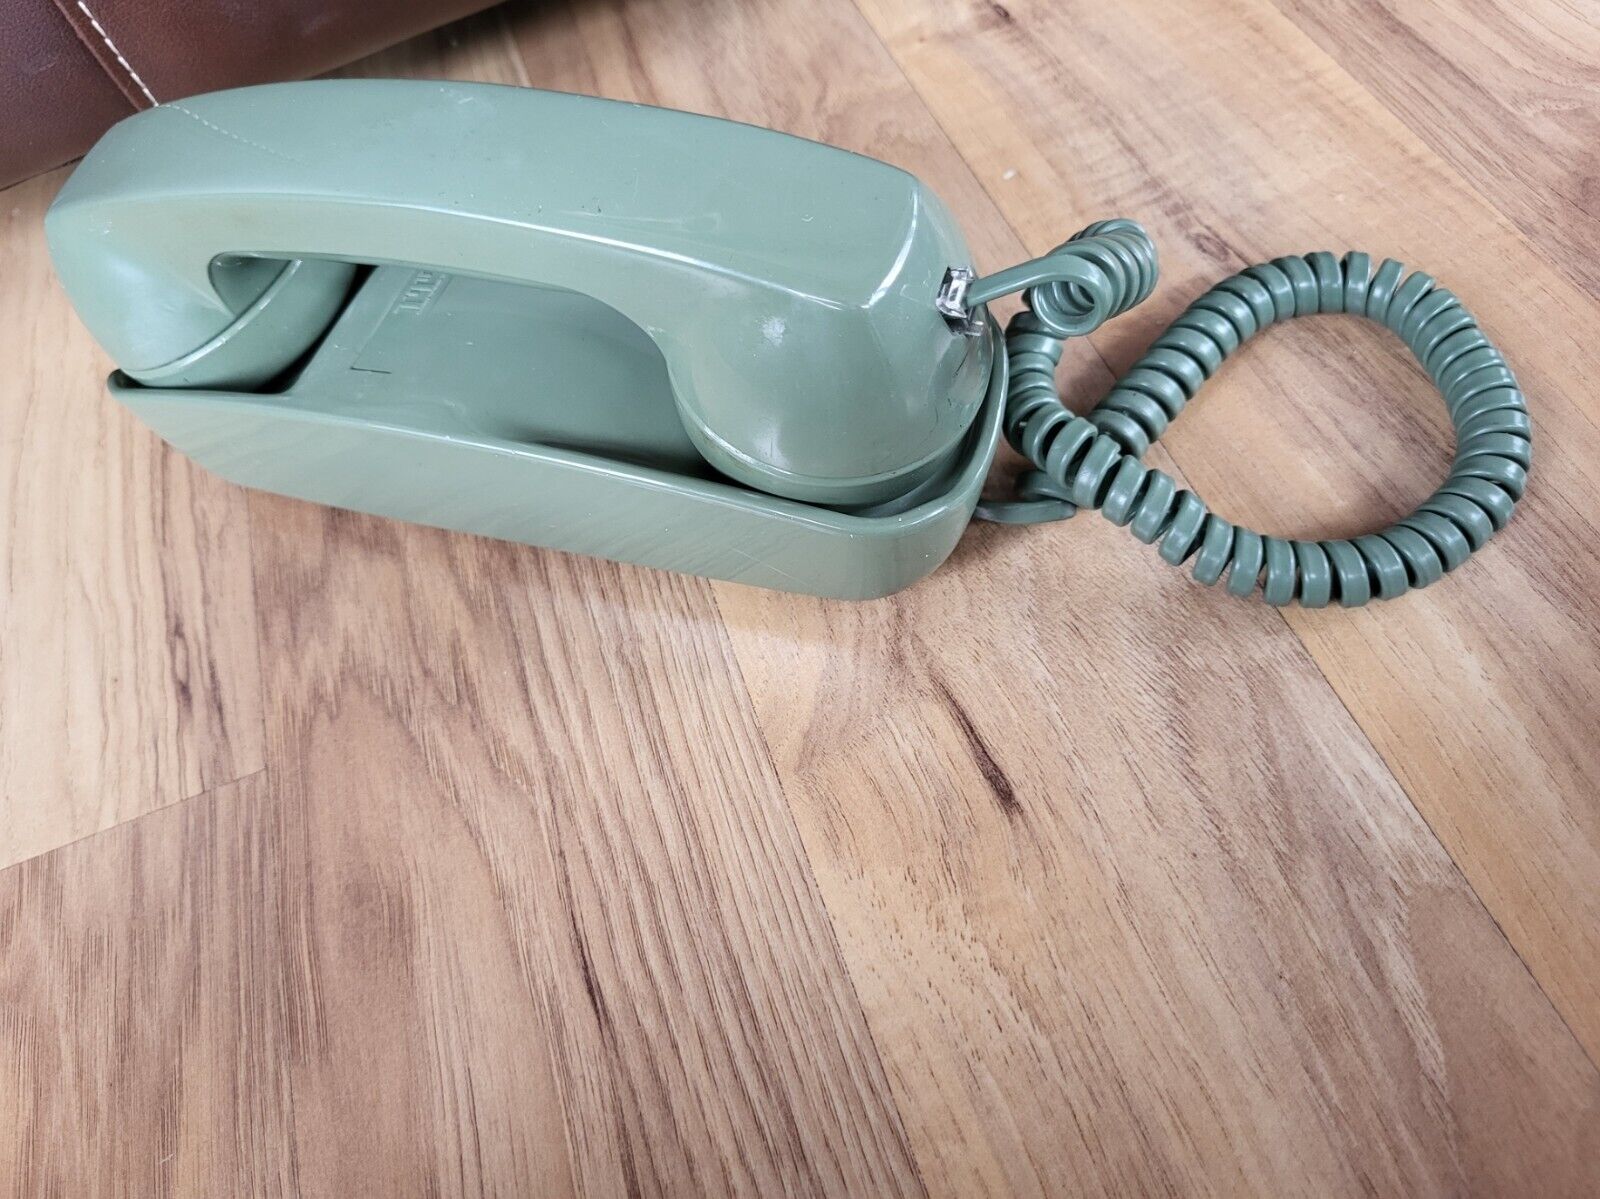 Vintage ITT Green Trimline Table Telephone - No Dial Or Buttons on Phone